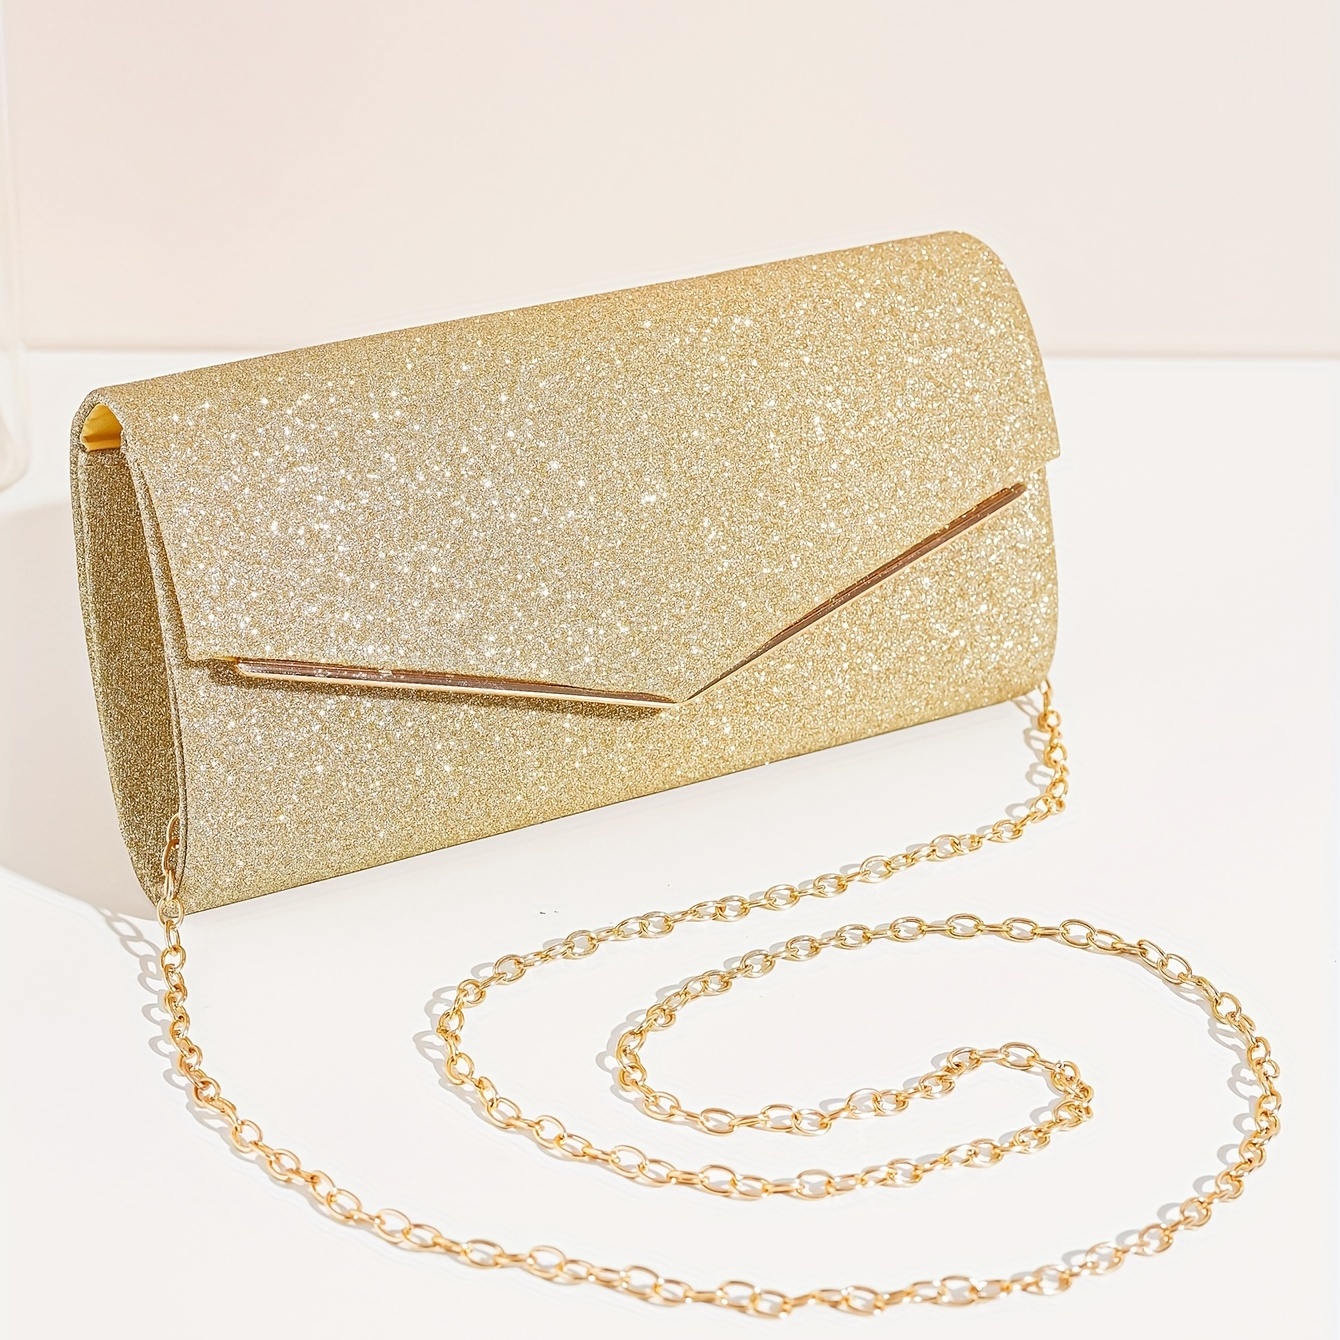 

Fashionable Glitter Long Wallet, Flap Clutch Chain Bag, Women's Elegant Evening Bag For Party For Carnaval Use